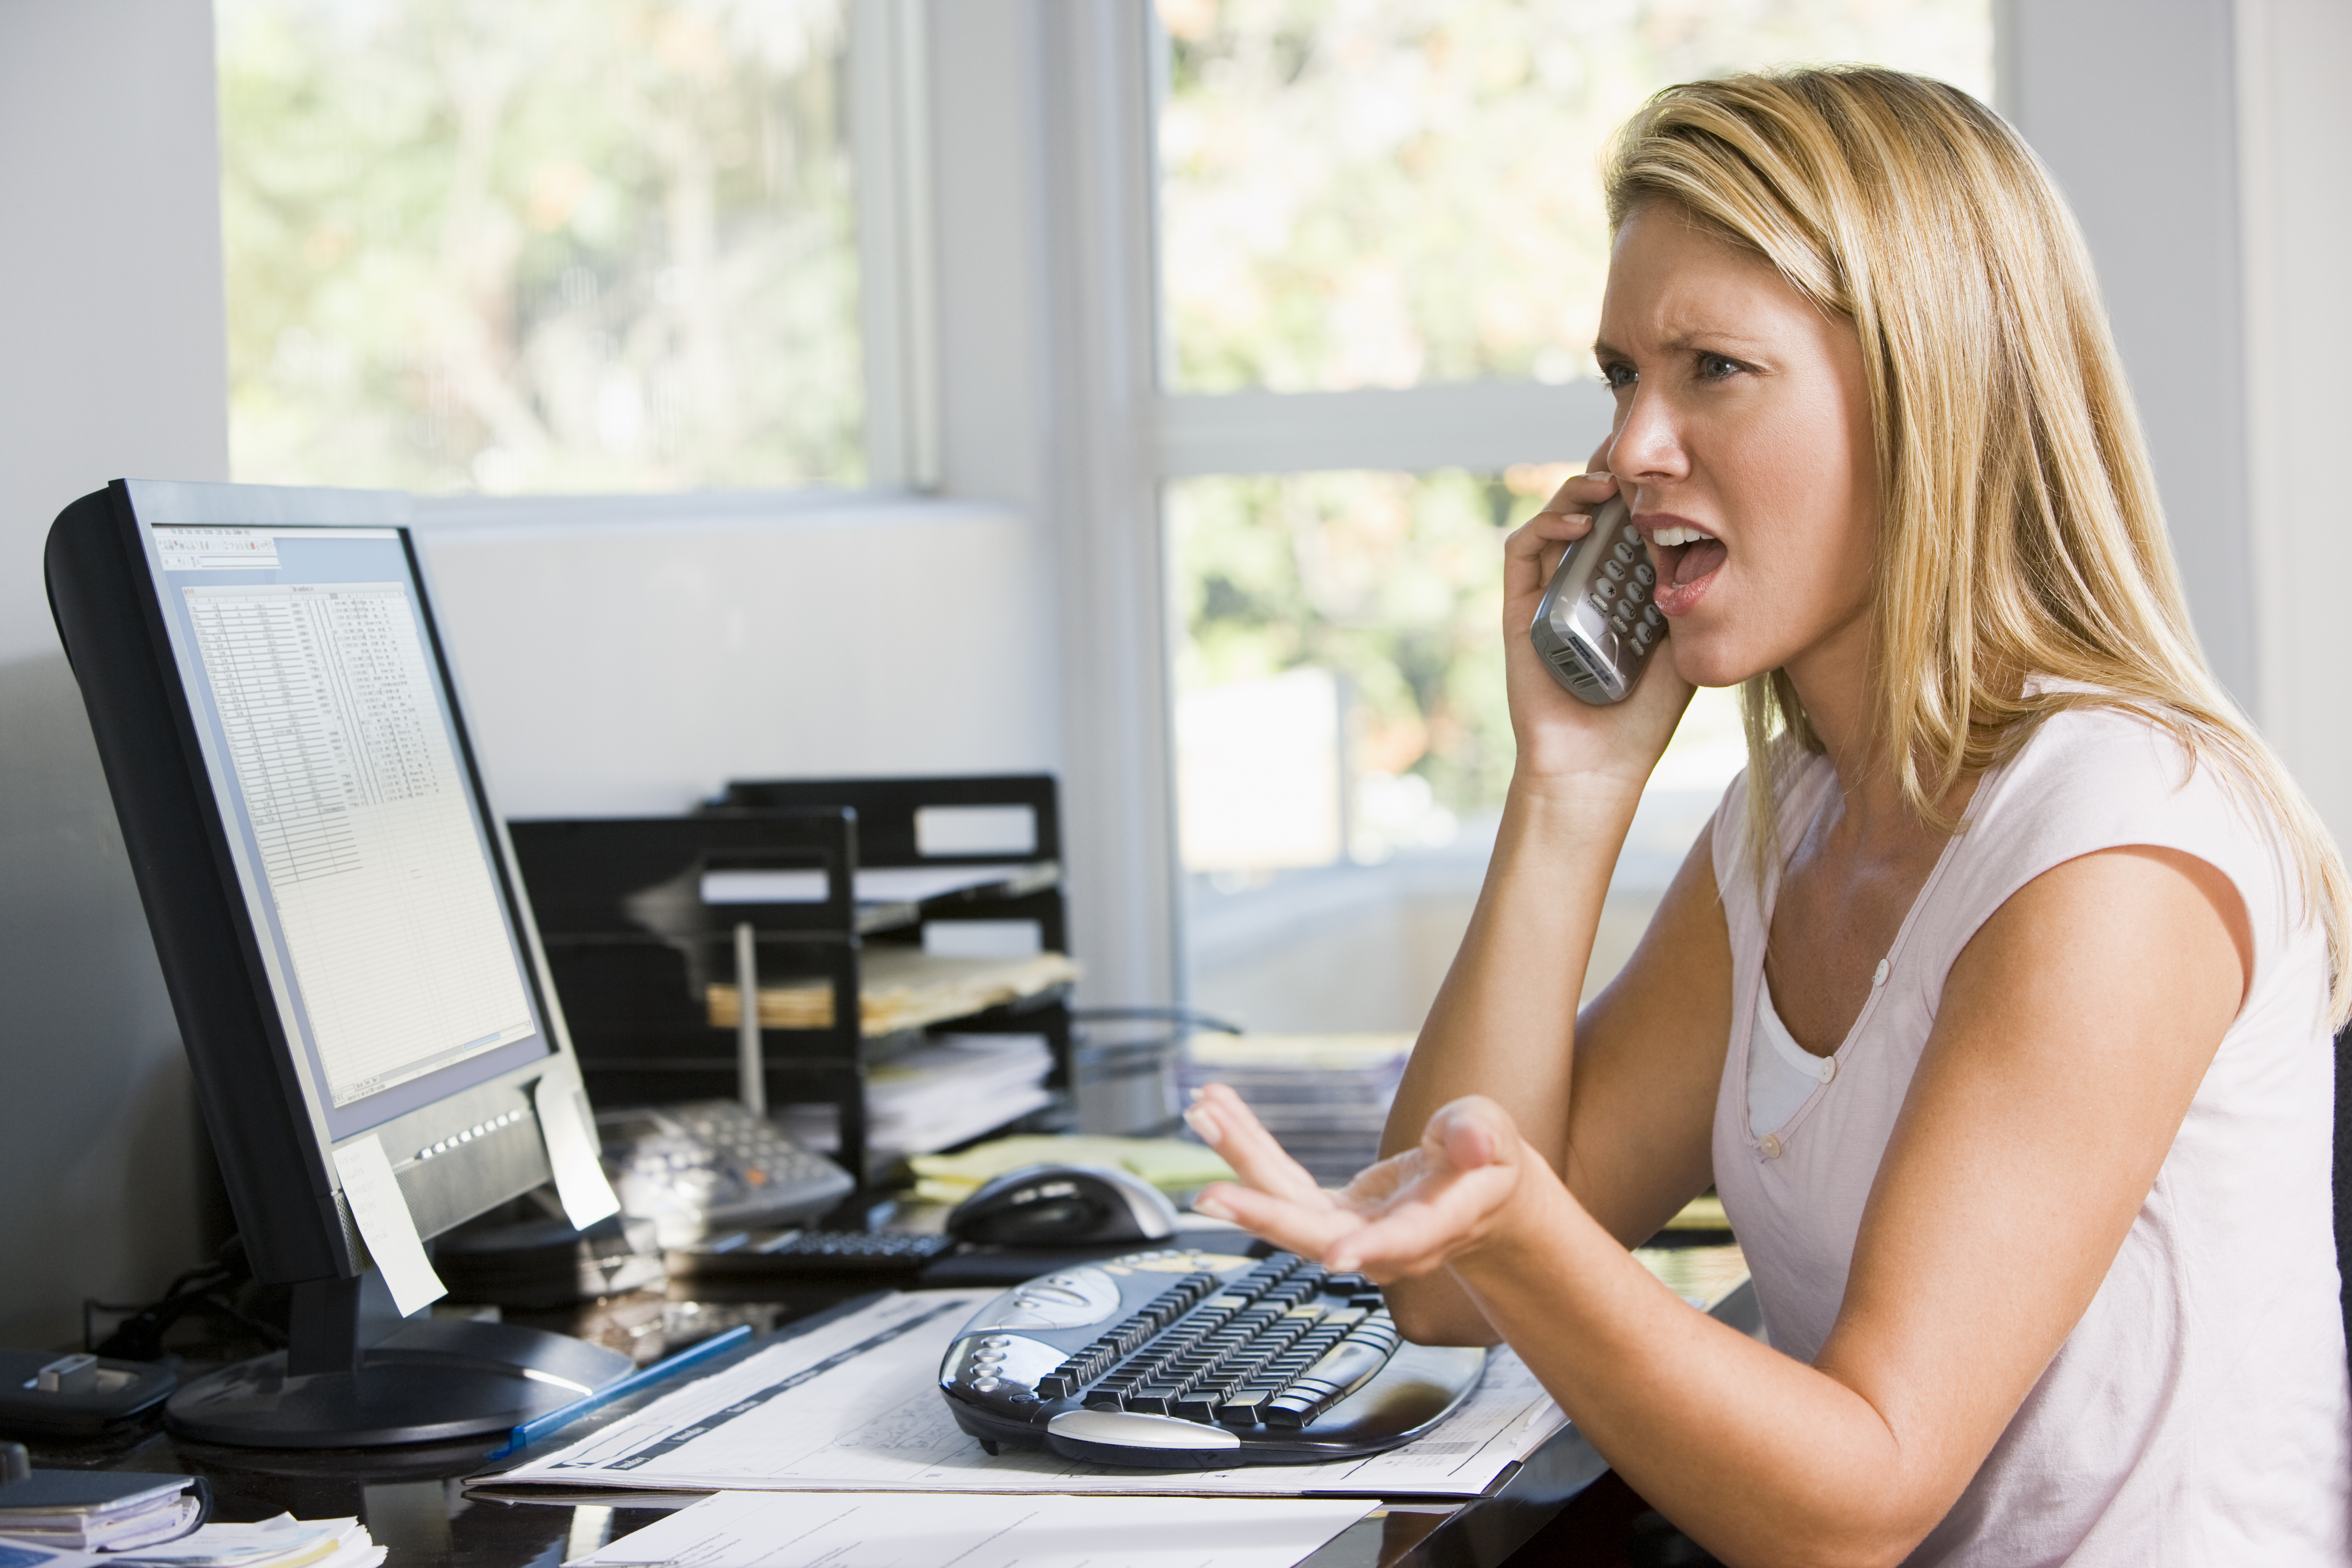 An angry woman on the phone | Source: Shutterstock